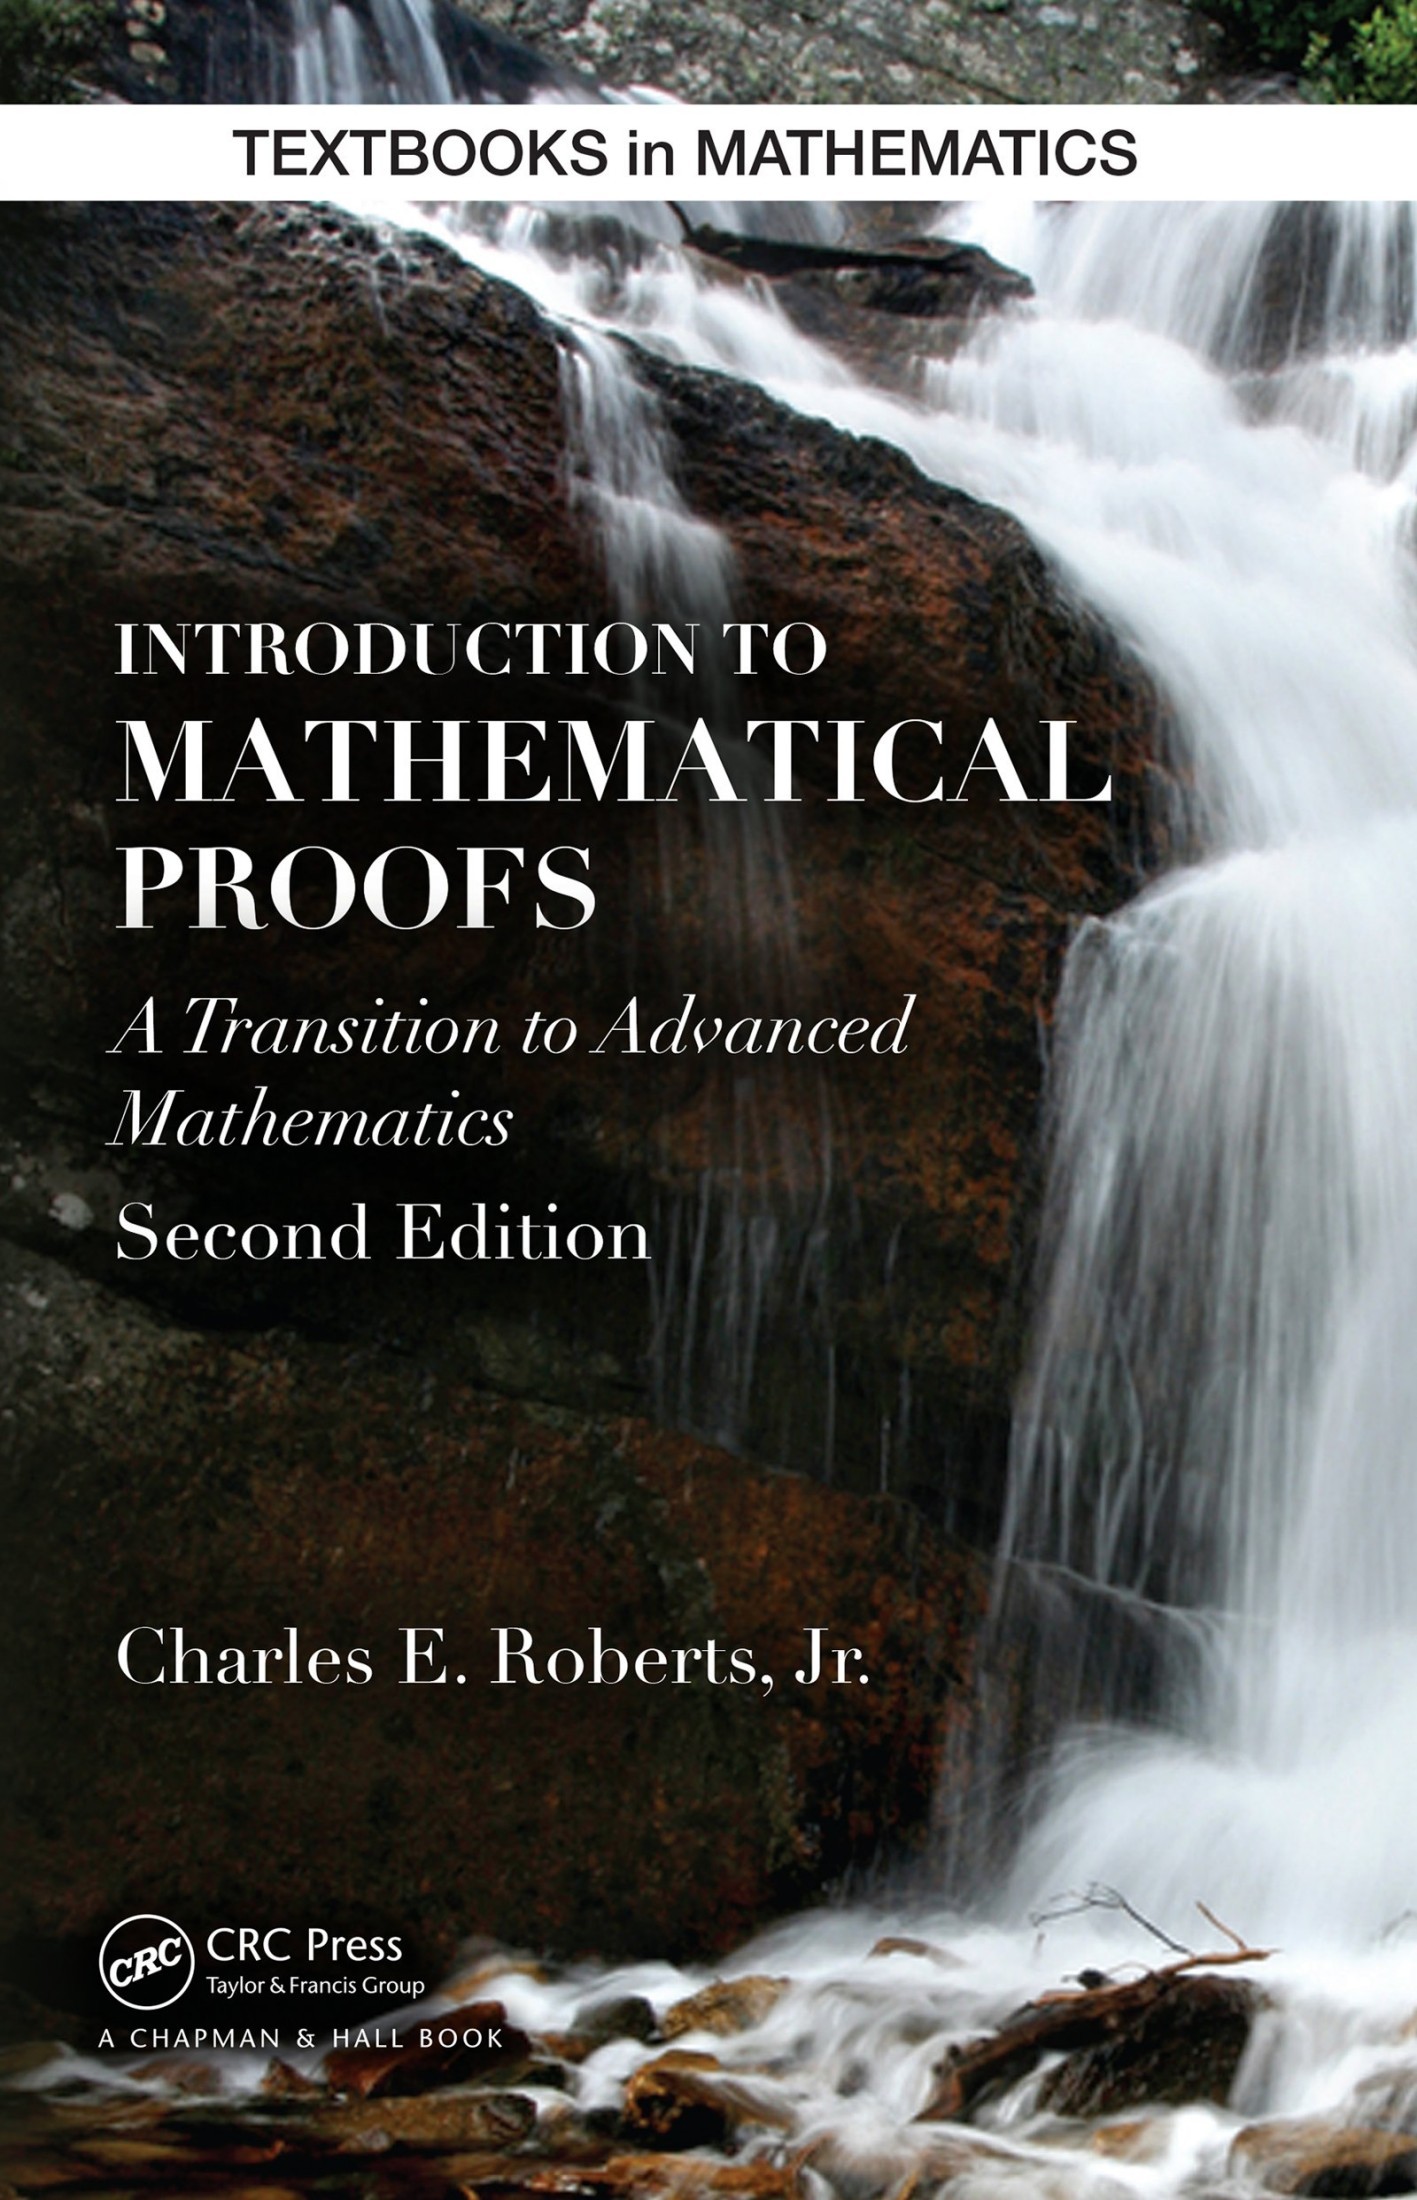 Introduction to Mathematical Proofs: A Transition to Advanced Mathematics, Second Edition